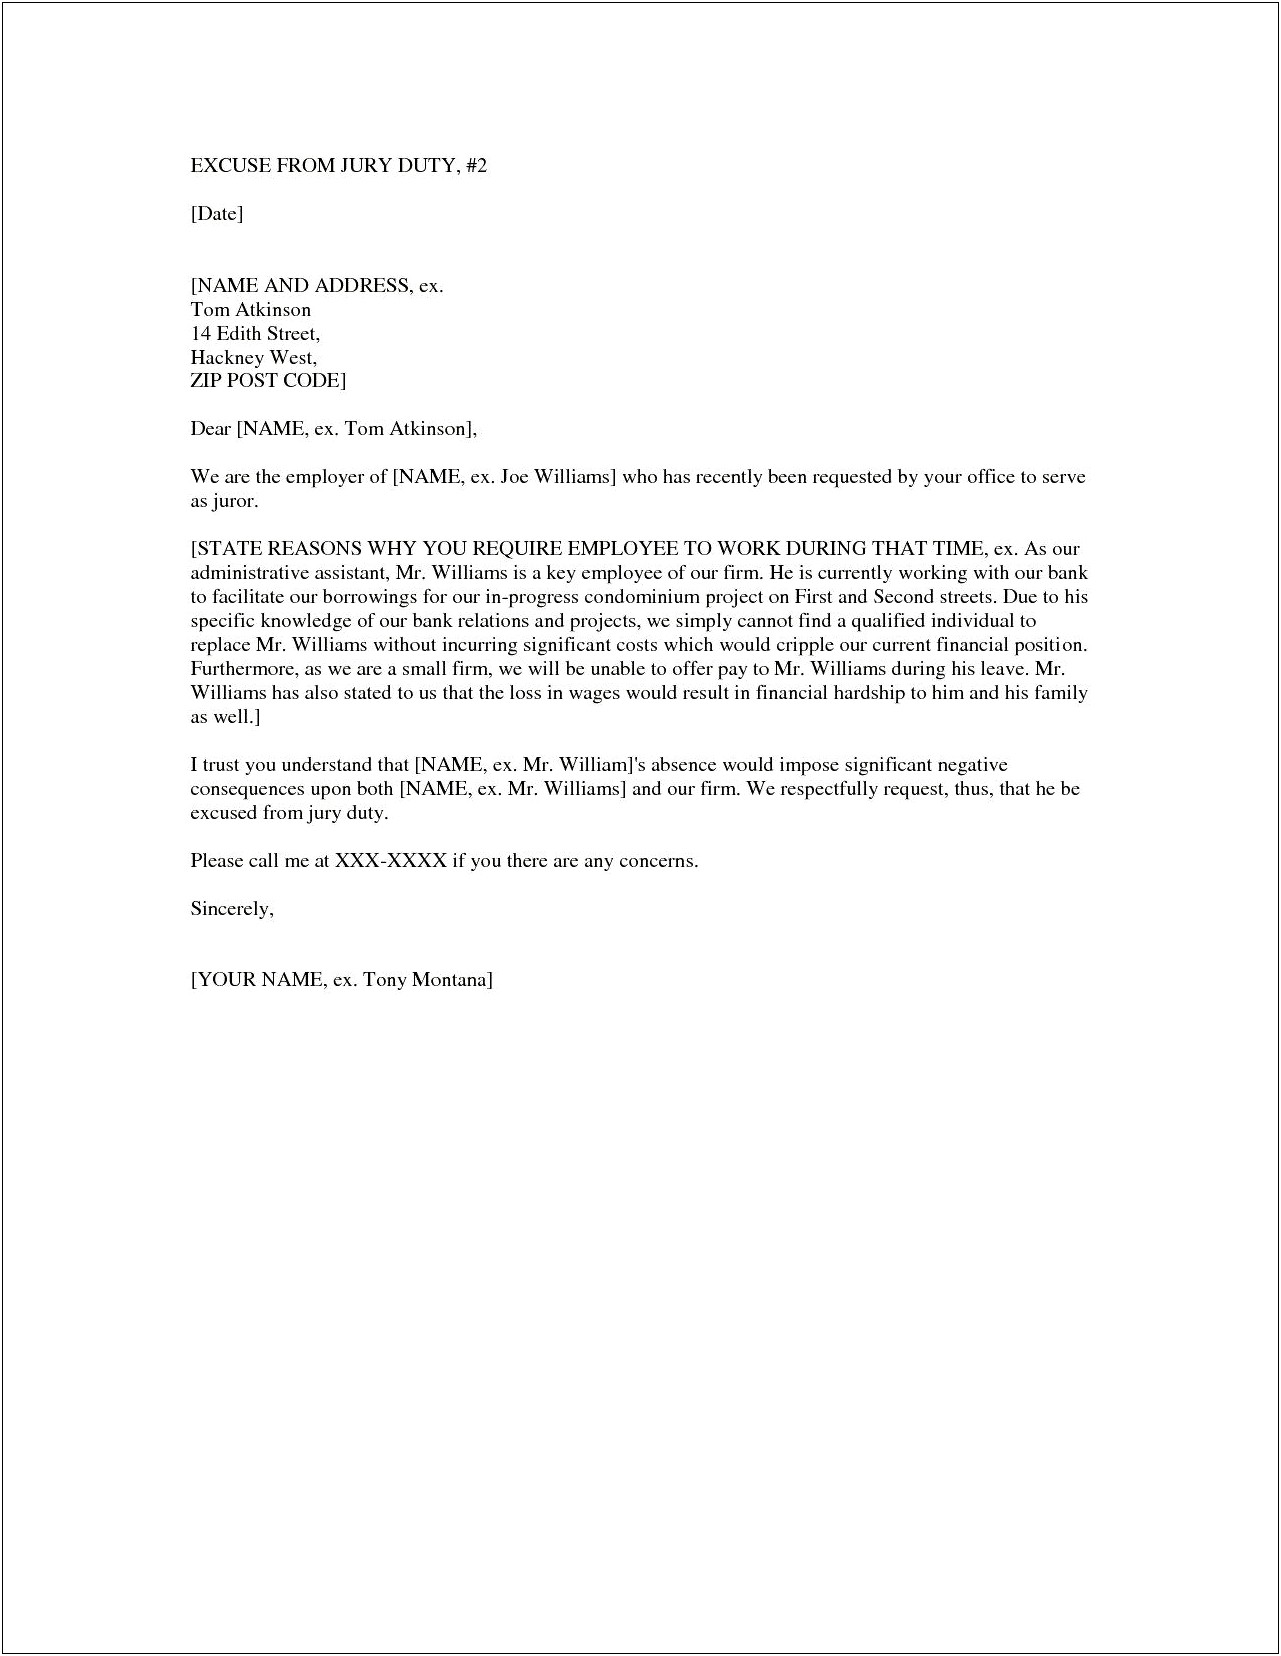 Jury Duty Excuse Letter From Employer Template